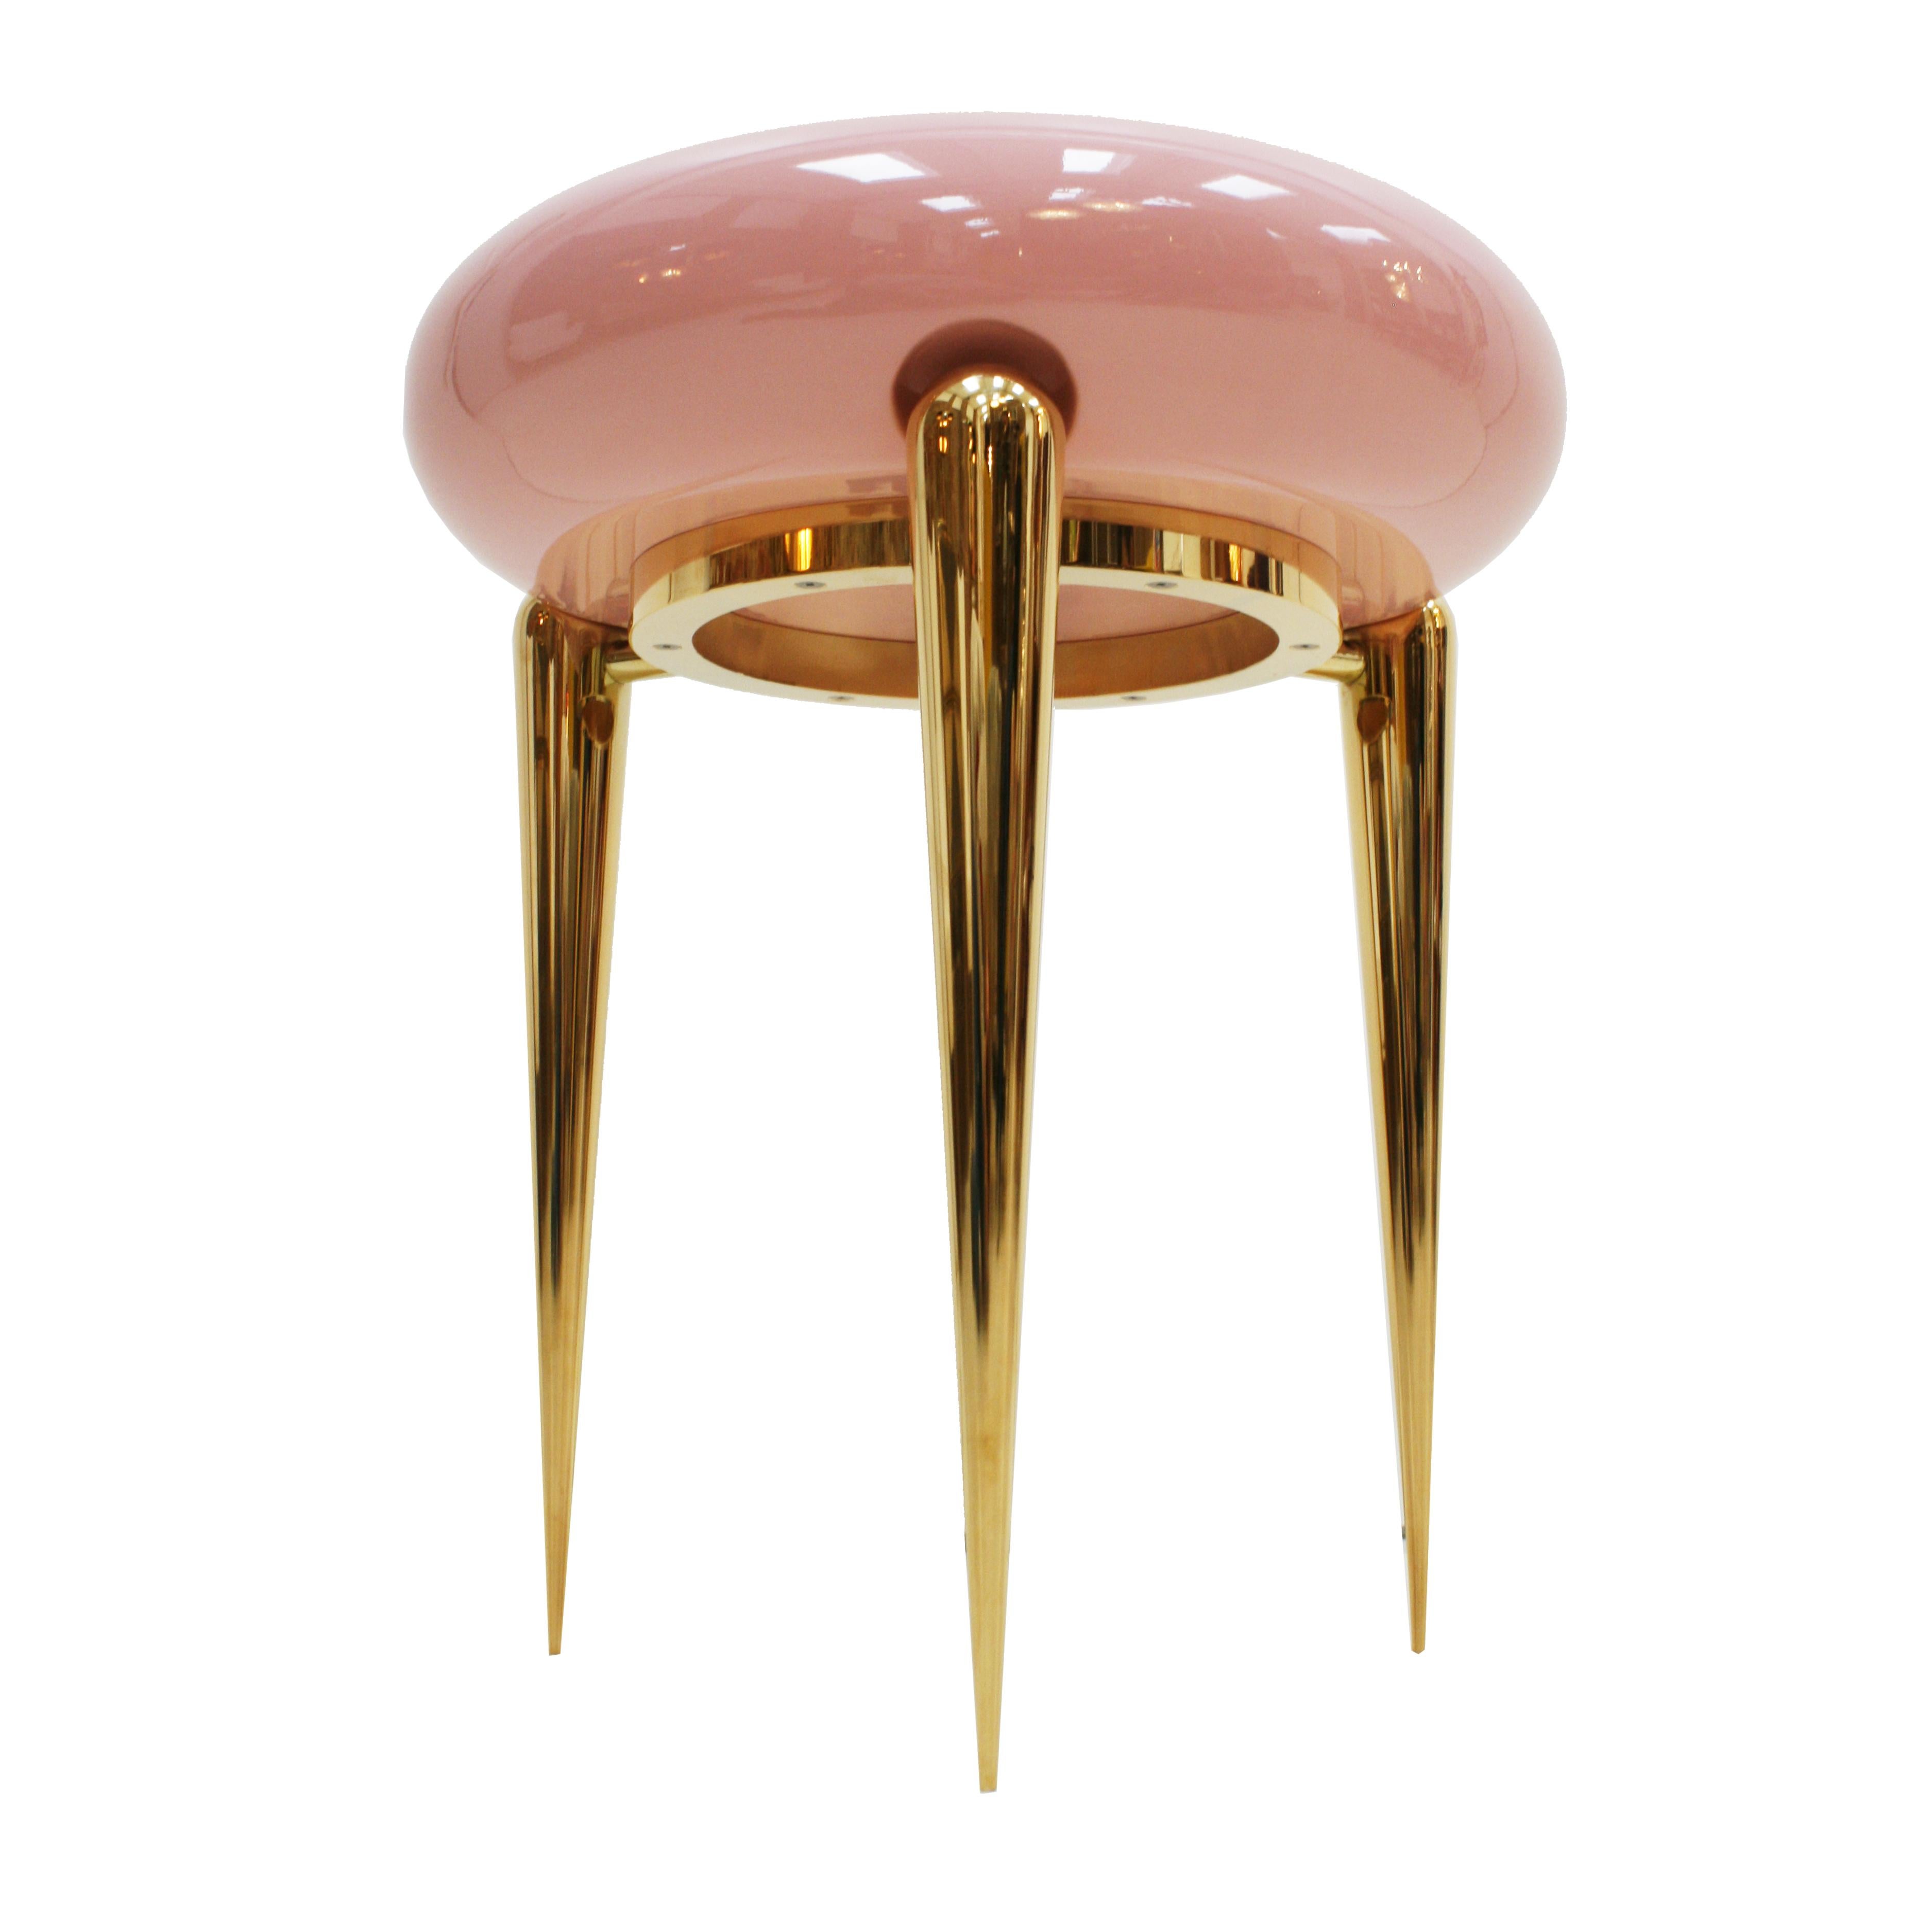 Modern circular coffee table composed of brass structure with three gold-plated truncated cone shape legs and high-gloss pink lacquered solid wood top. Made in Germany.

